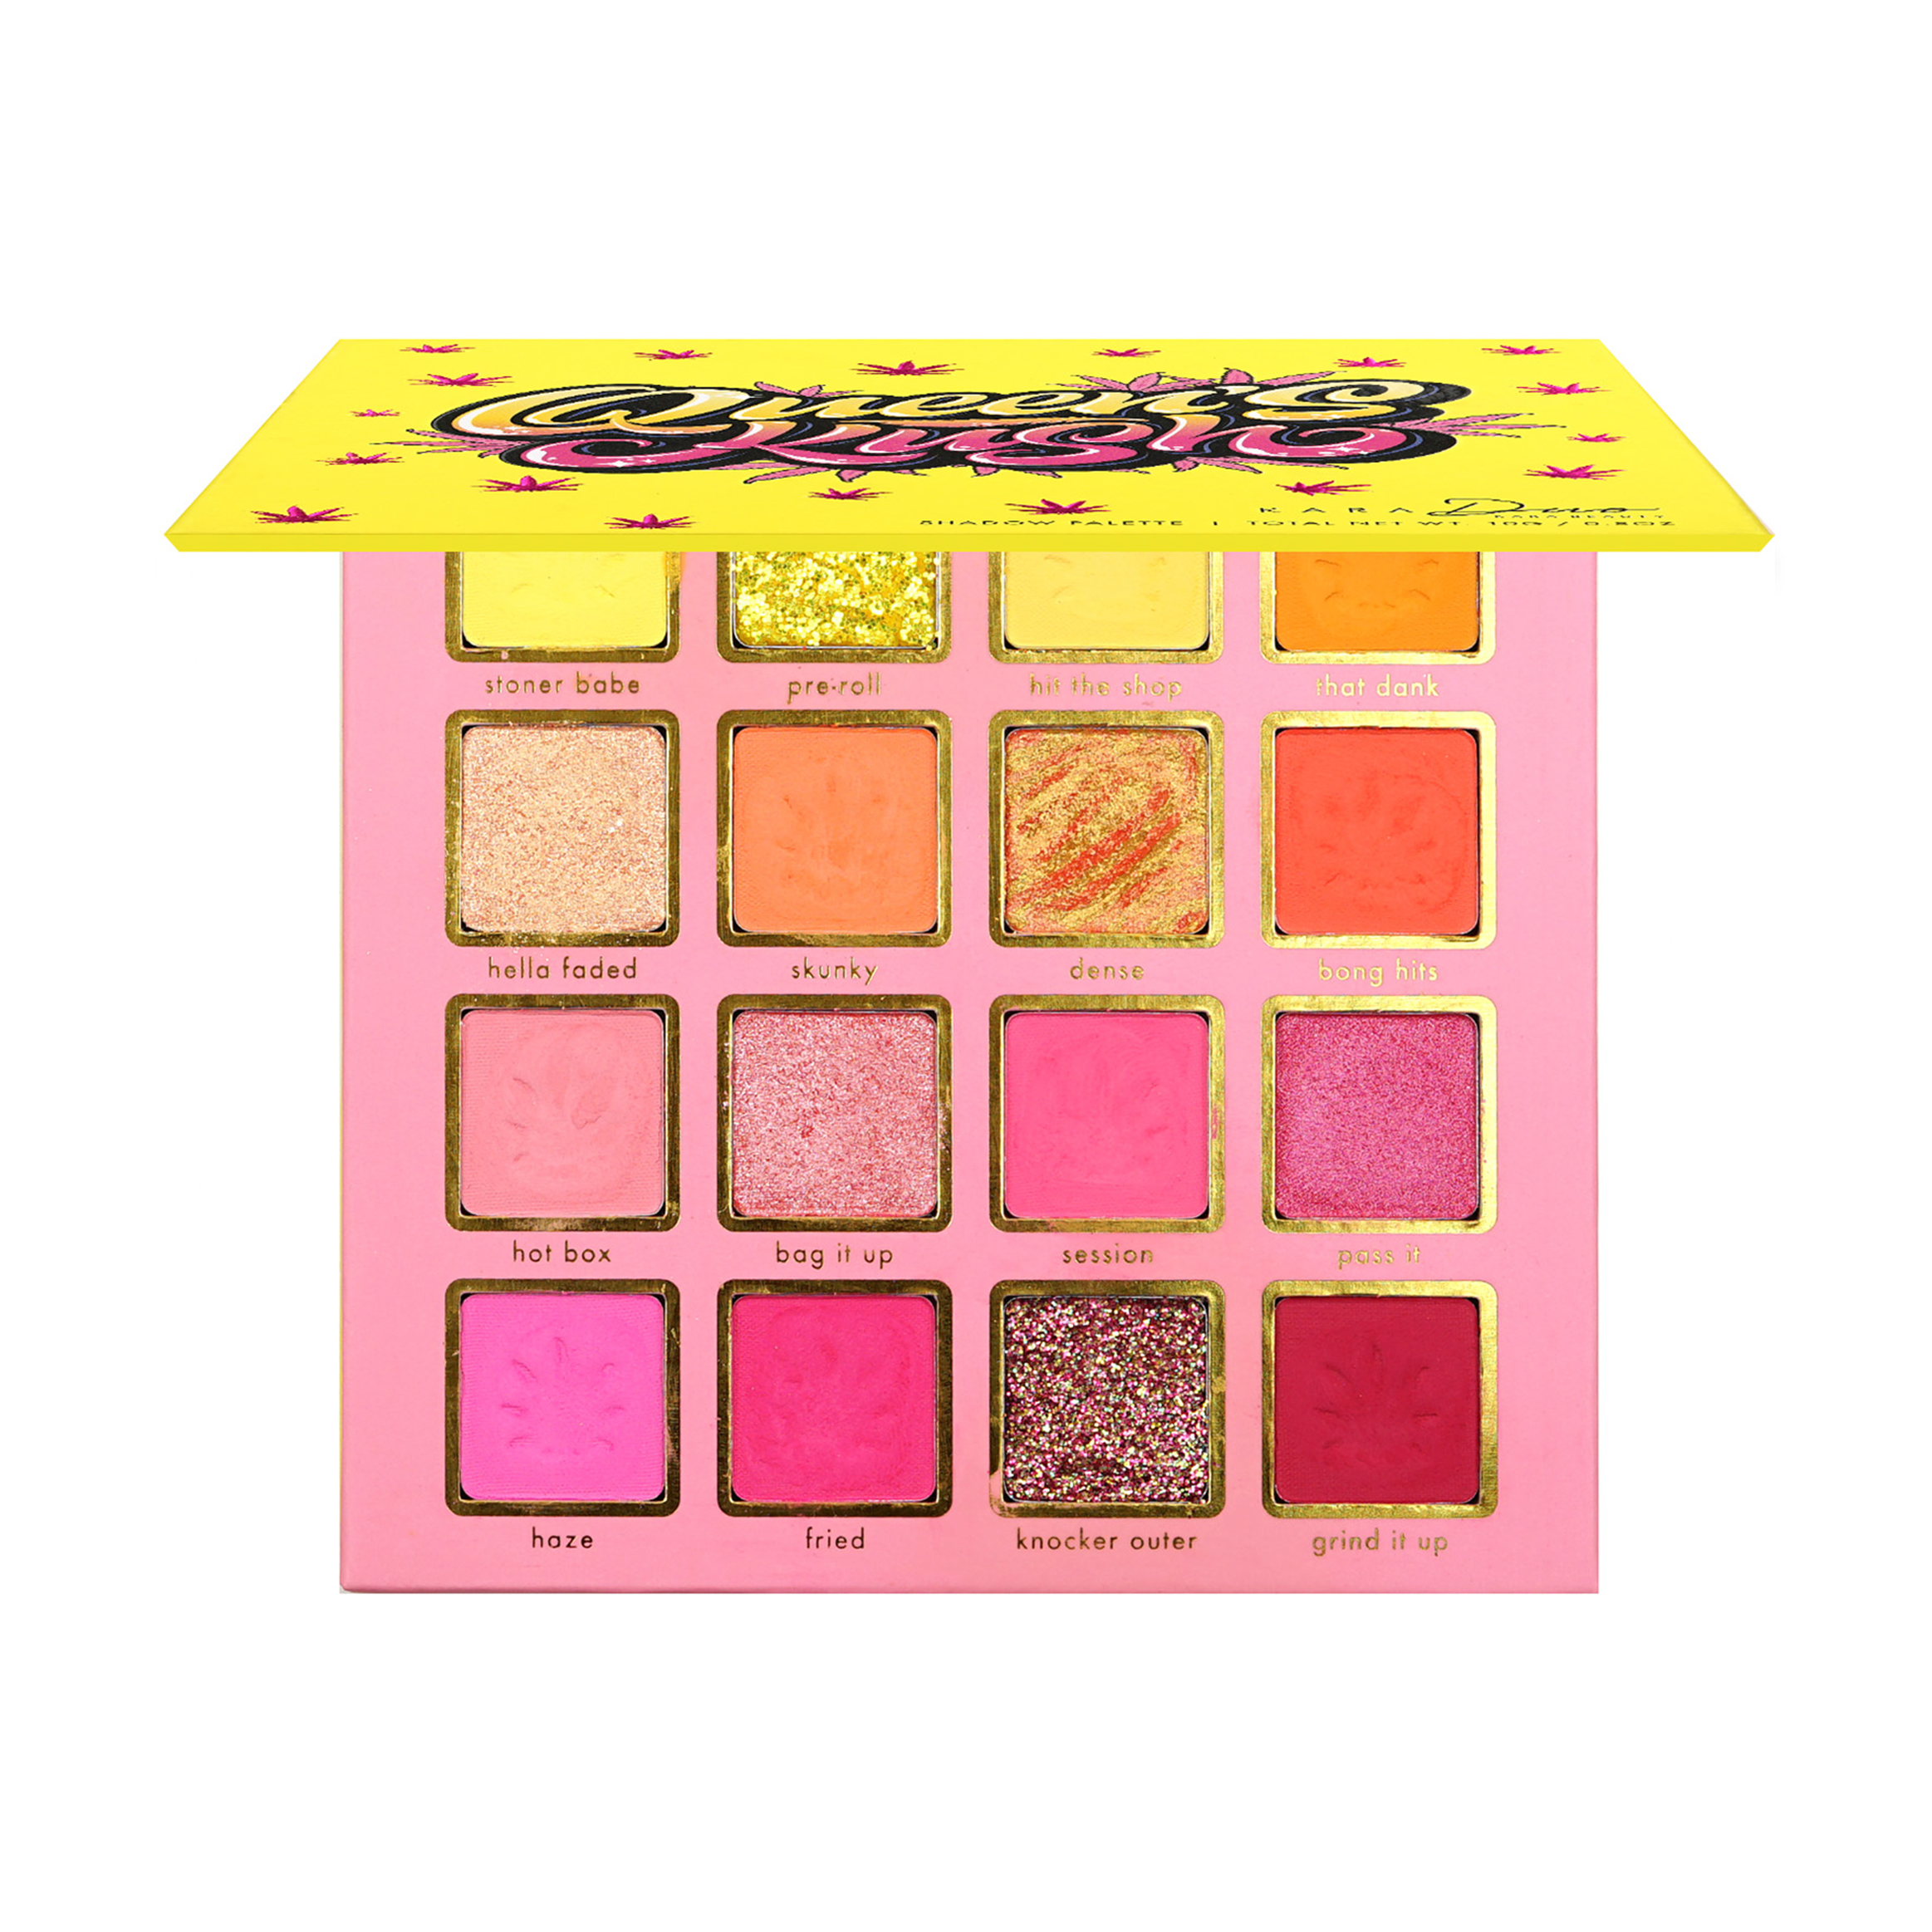 Kata Beauty's Queen's Kush 24-Shade 420 inspired weed Eyeshadow Palette